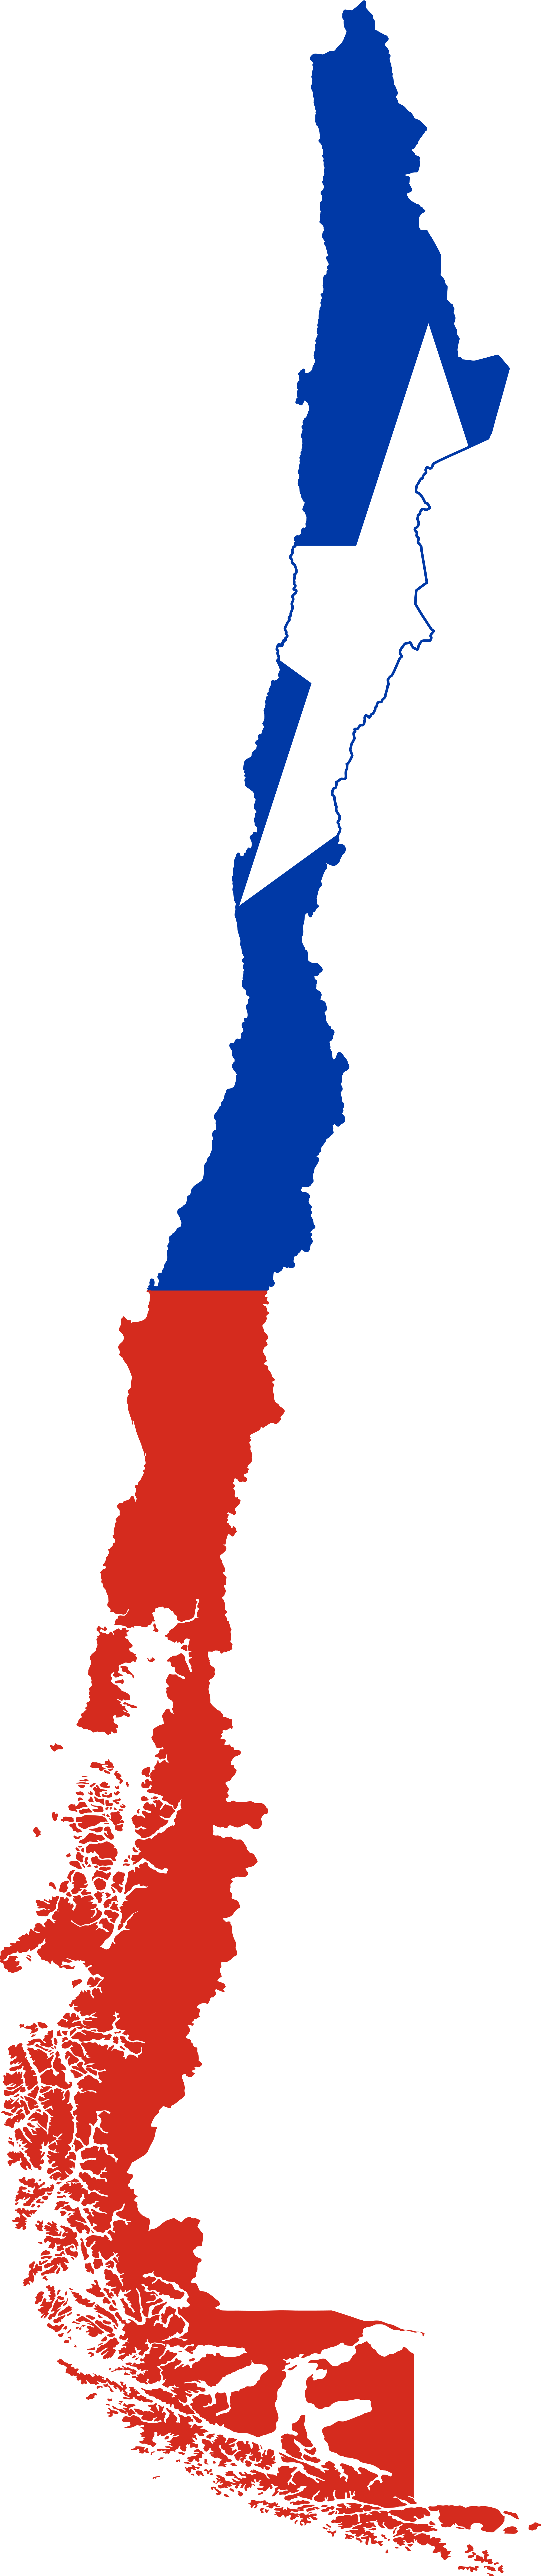 Map of Chile with Regions - S